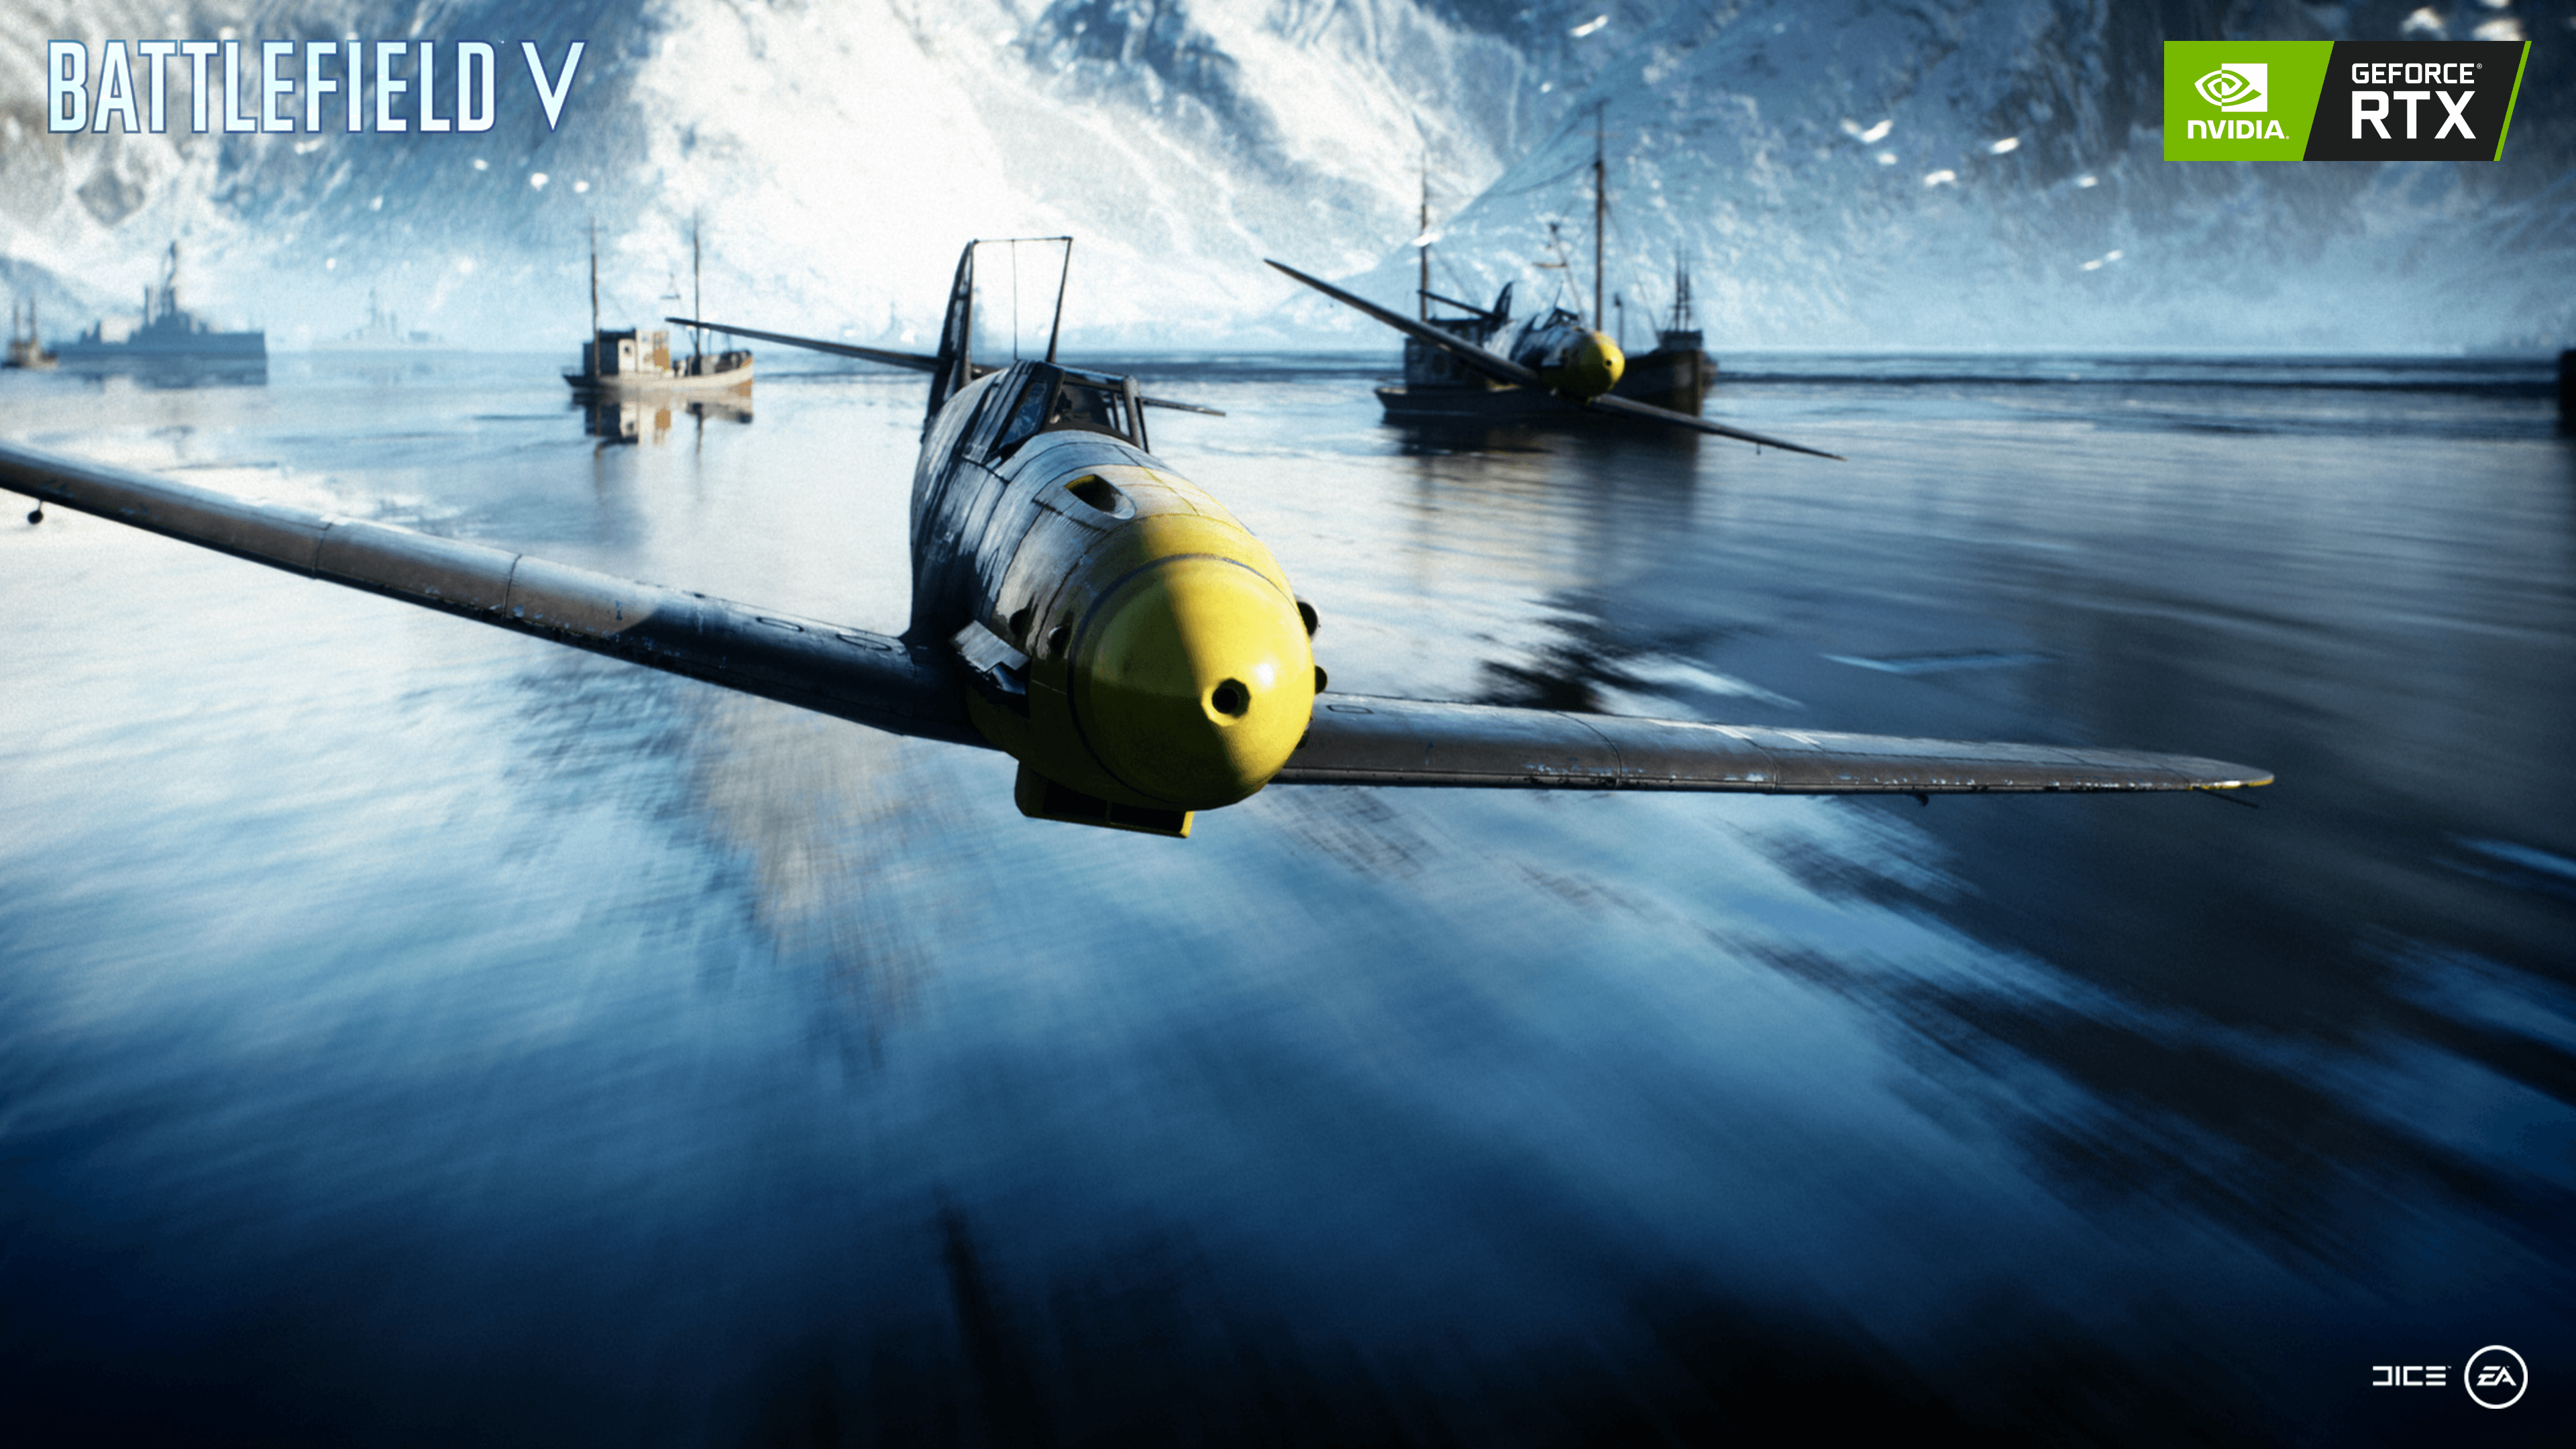 Battlefield V, NVIDIA RTX Ray Tracing, And GeForce RTX Combine To